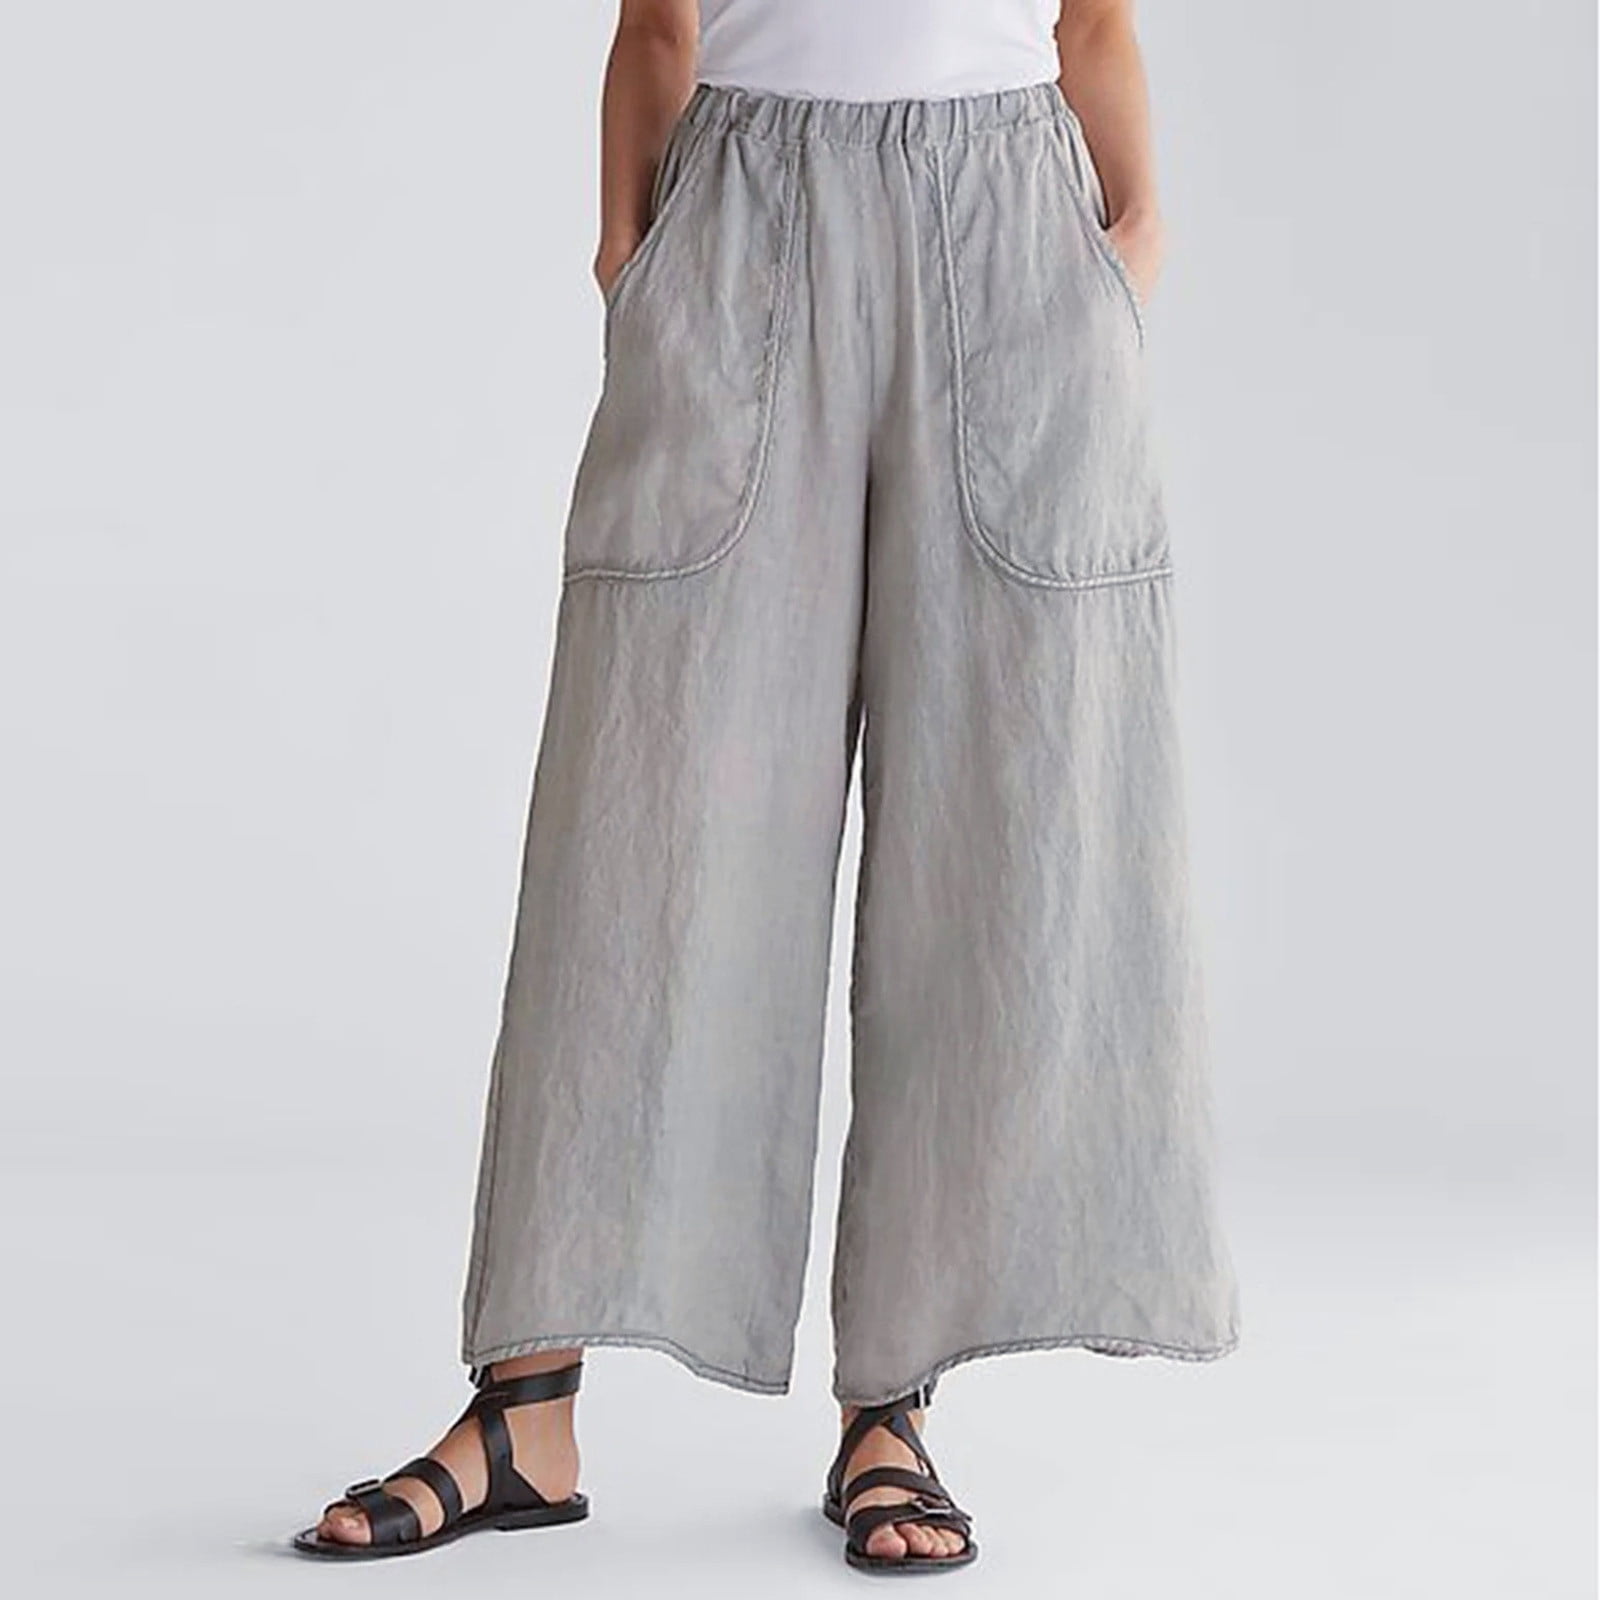 SELONE Linen Pants for Women High Waist Beach With Pockets Baggy Elastic  Waist Casual Linen Long Pant Ladies Solid Color Cotton And Big Pants for